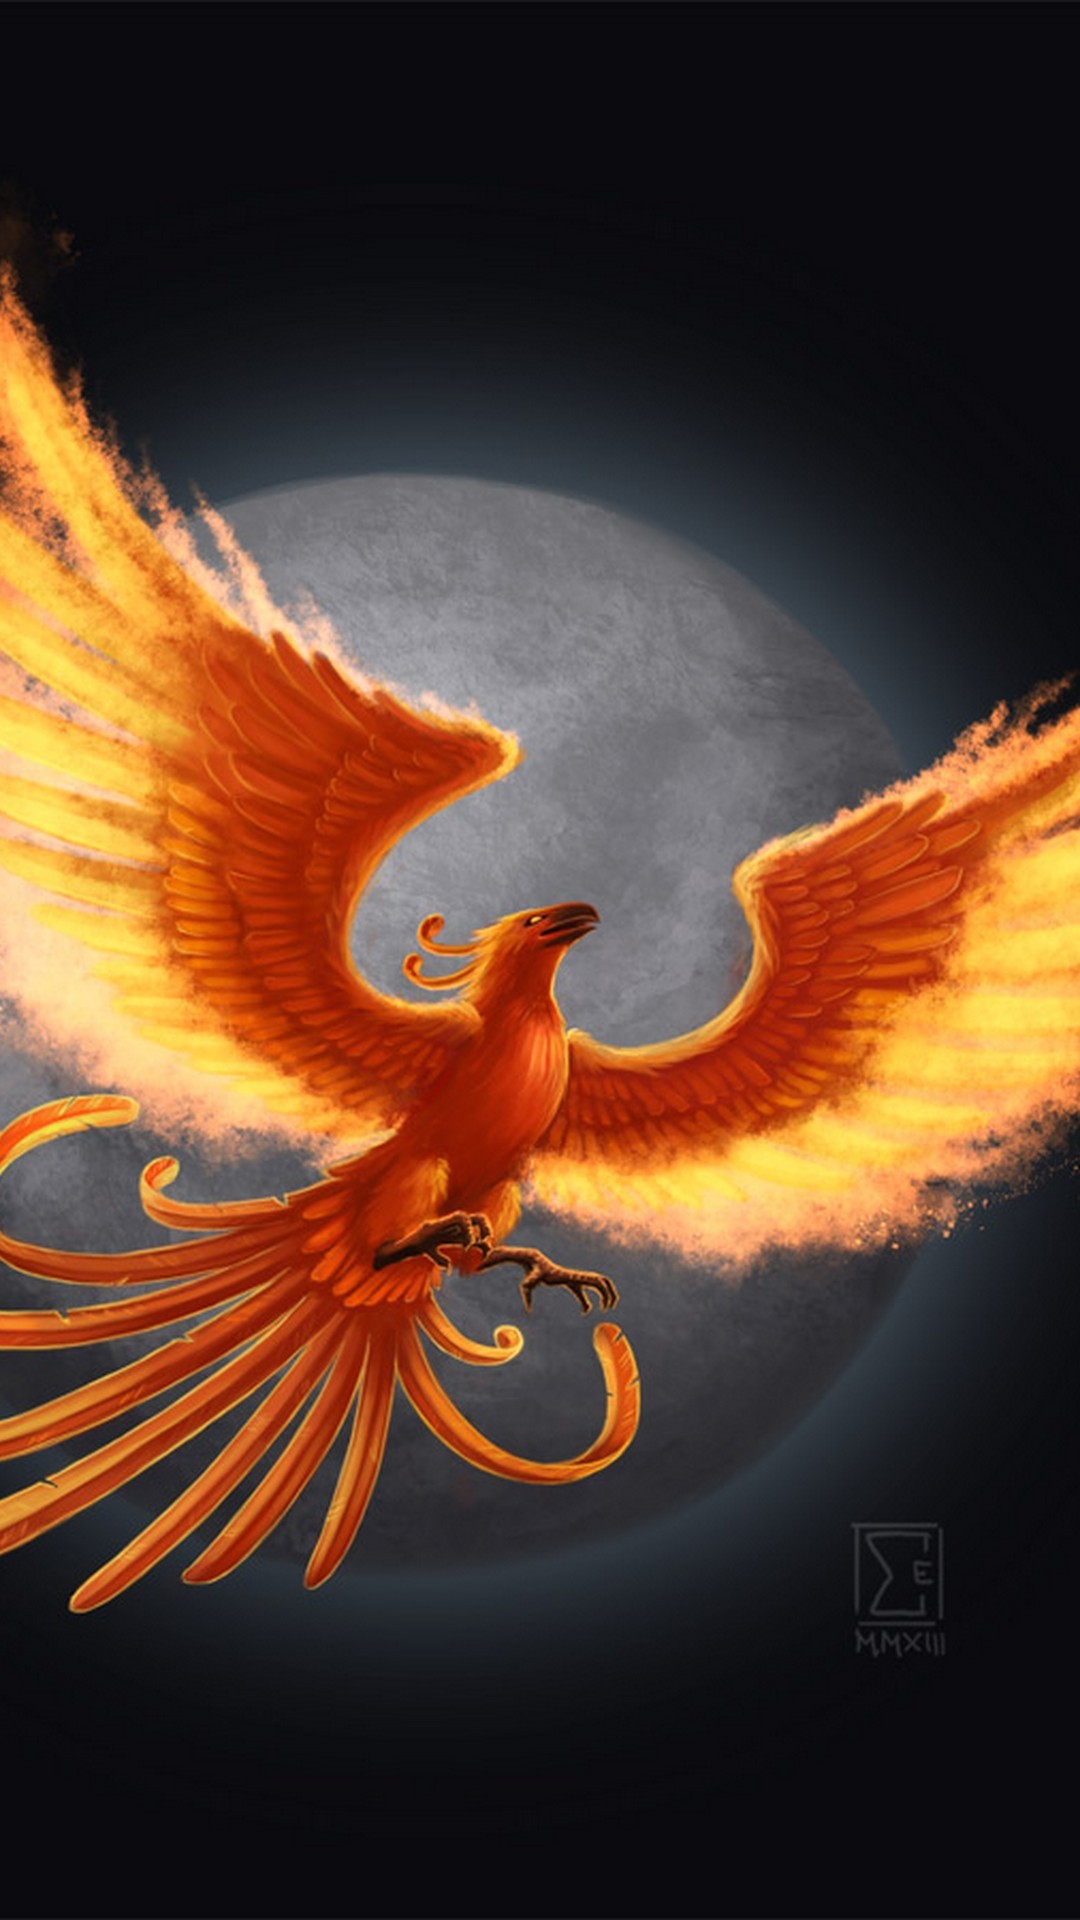 Mobile Wallpapers Phoenix Images With Image Resolution - Phoenix Mythical  Creature Logo - 1080x1920 Wallpaper 